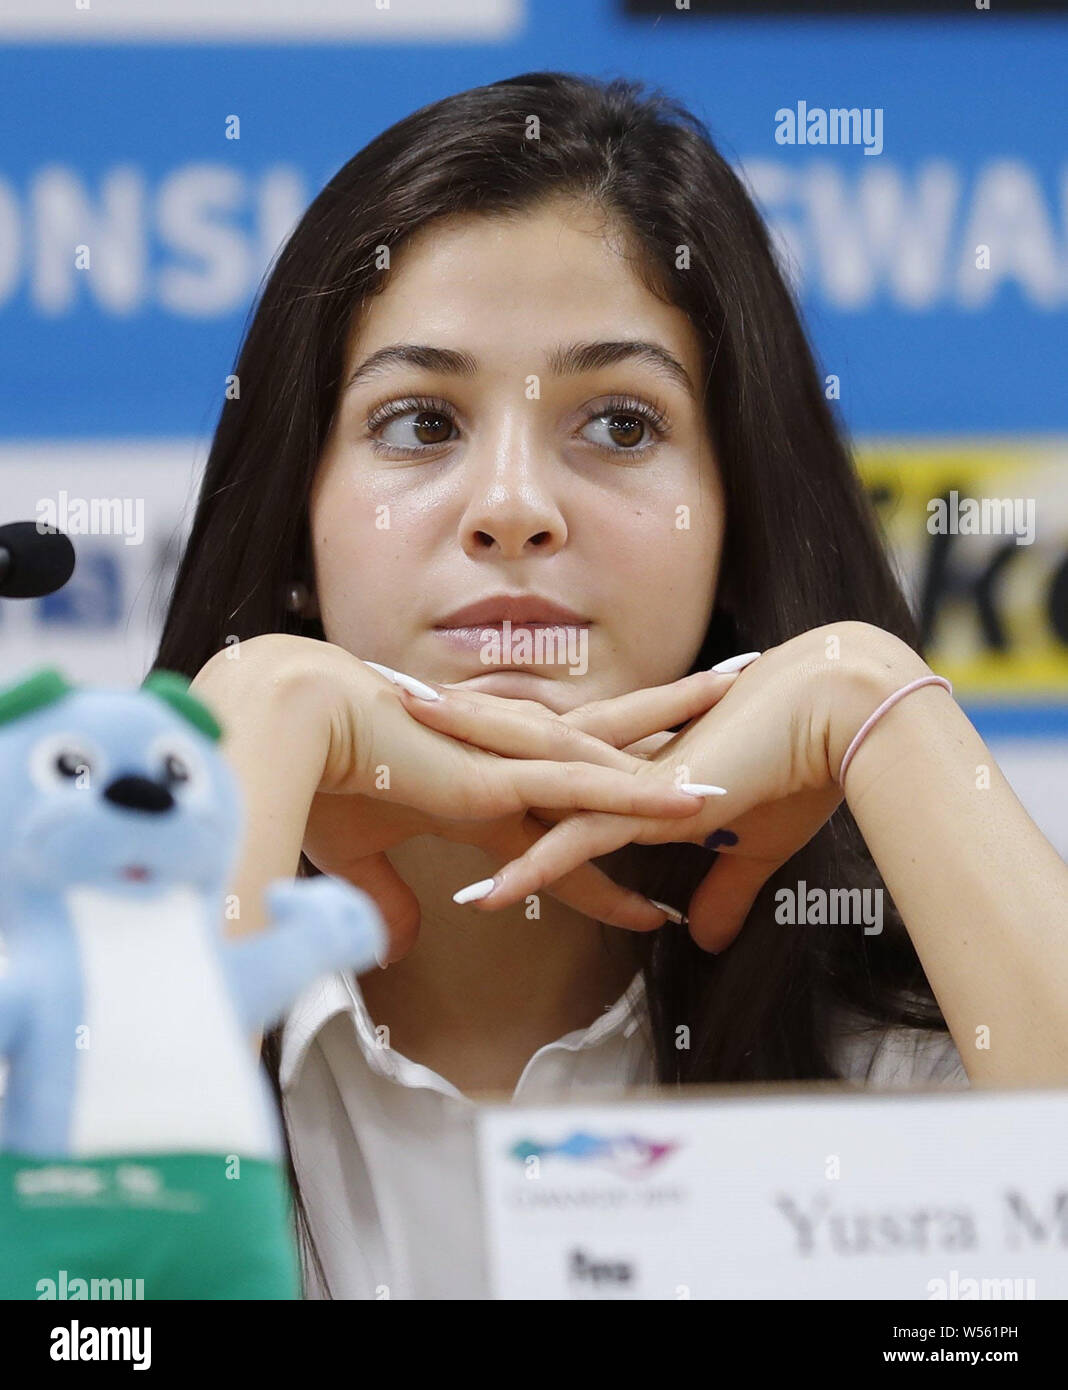 Syrian-born swimmer Yusra Mardini, who competed at the 2016 Rio de Janeiro Olympics as a member of the Refugee Olympic Team, attends a press conference in Gwangju, South Korea, on July 26, 2019. Mardini said she wants to swim at the 2020 Tokyo Olympics. (Kyodo)==Kyodo Photo via Credit: Newscom/Alamy Live News Stock Photo